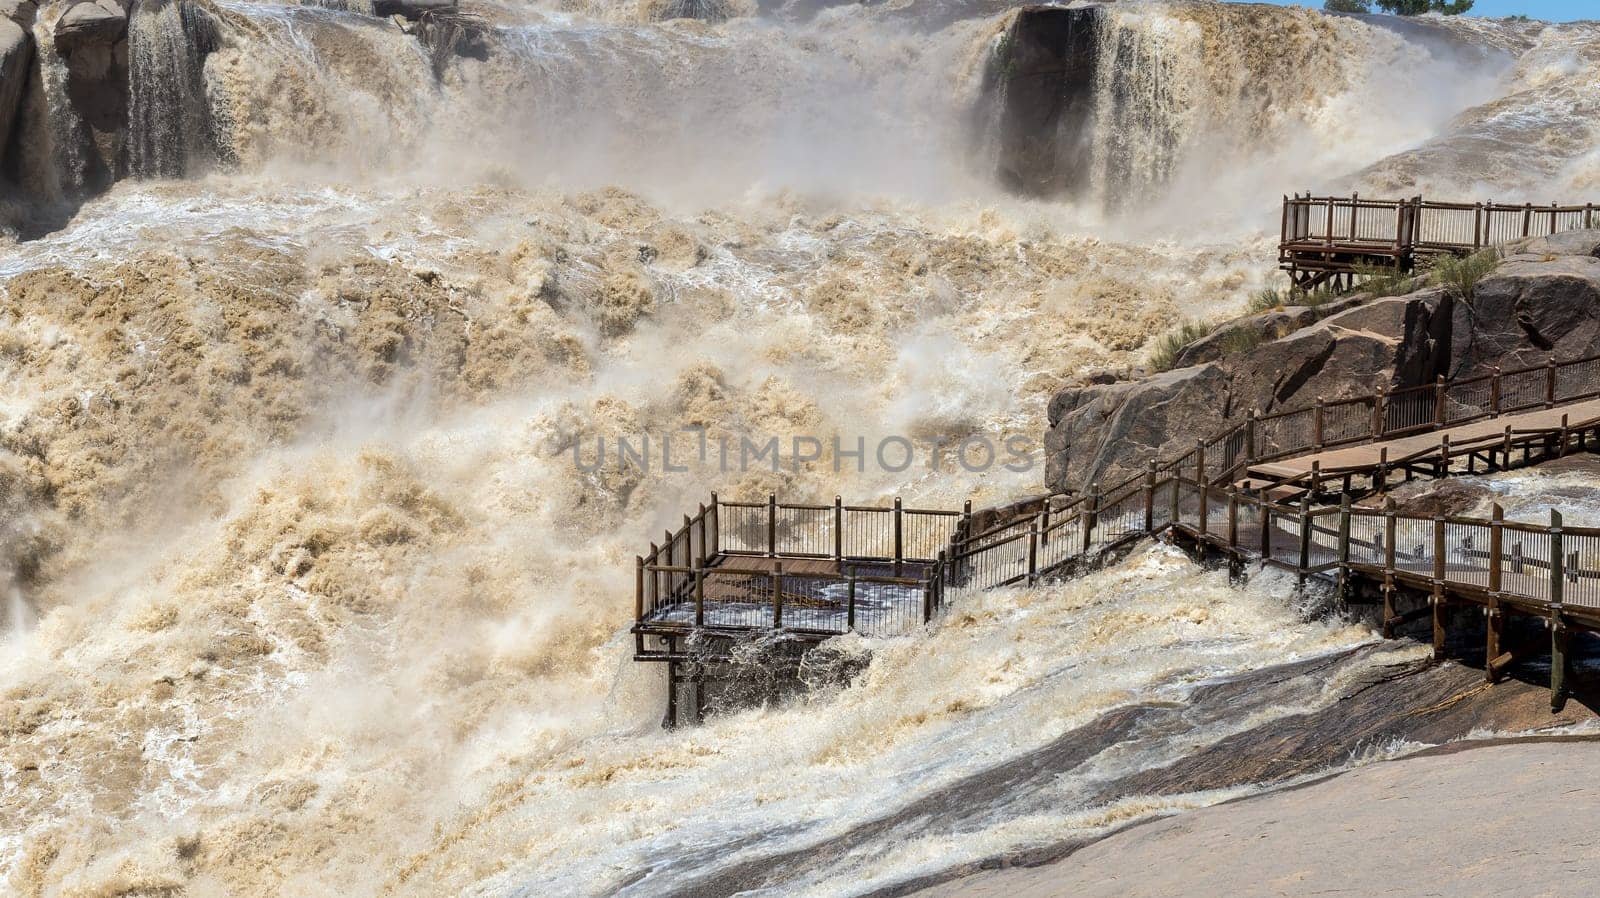 A flooded viewpoint at the main Augrabies waterfall in the Orange River